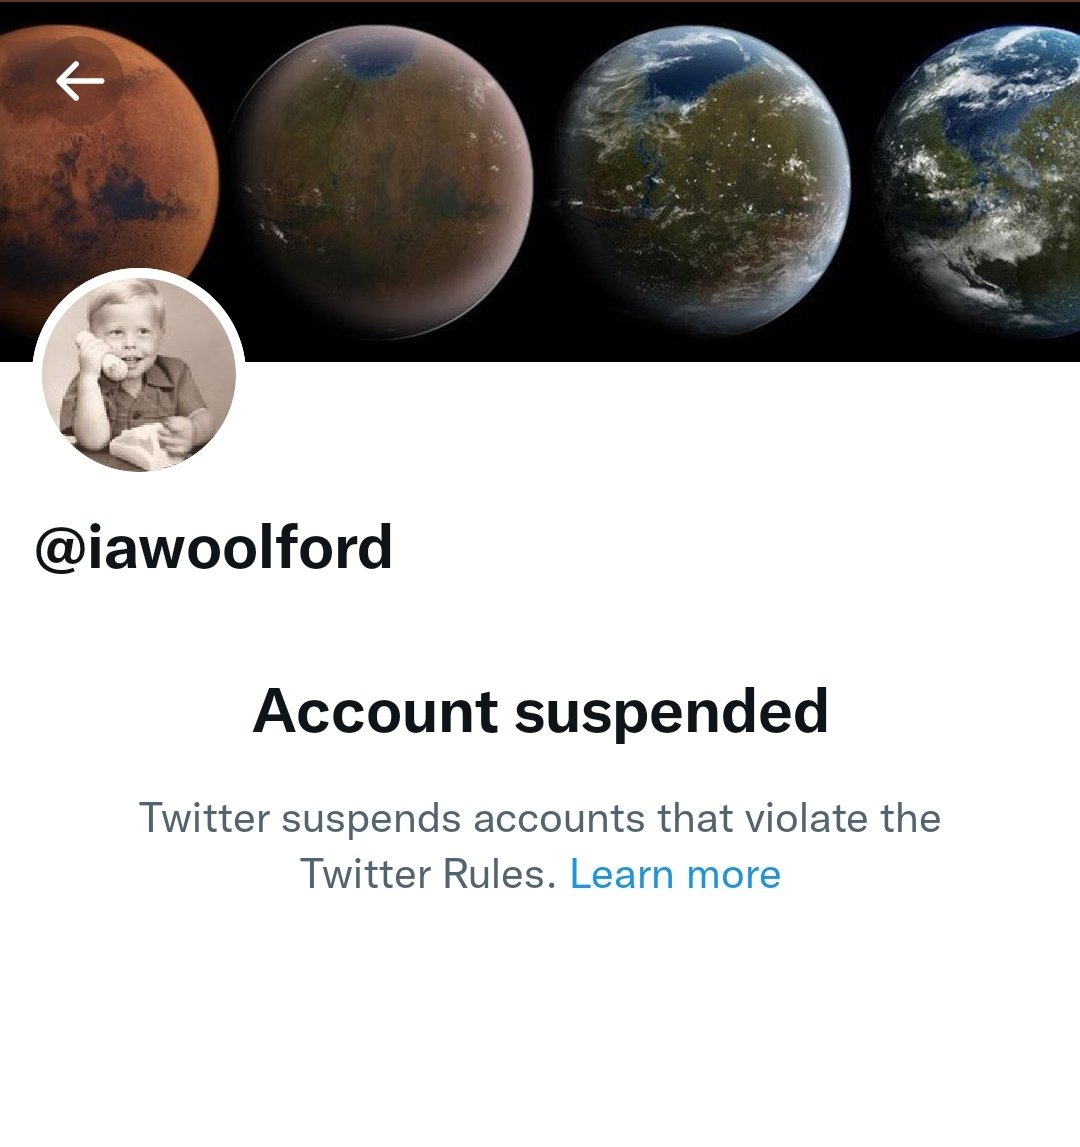 The account was later suspended on Saturday.